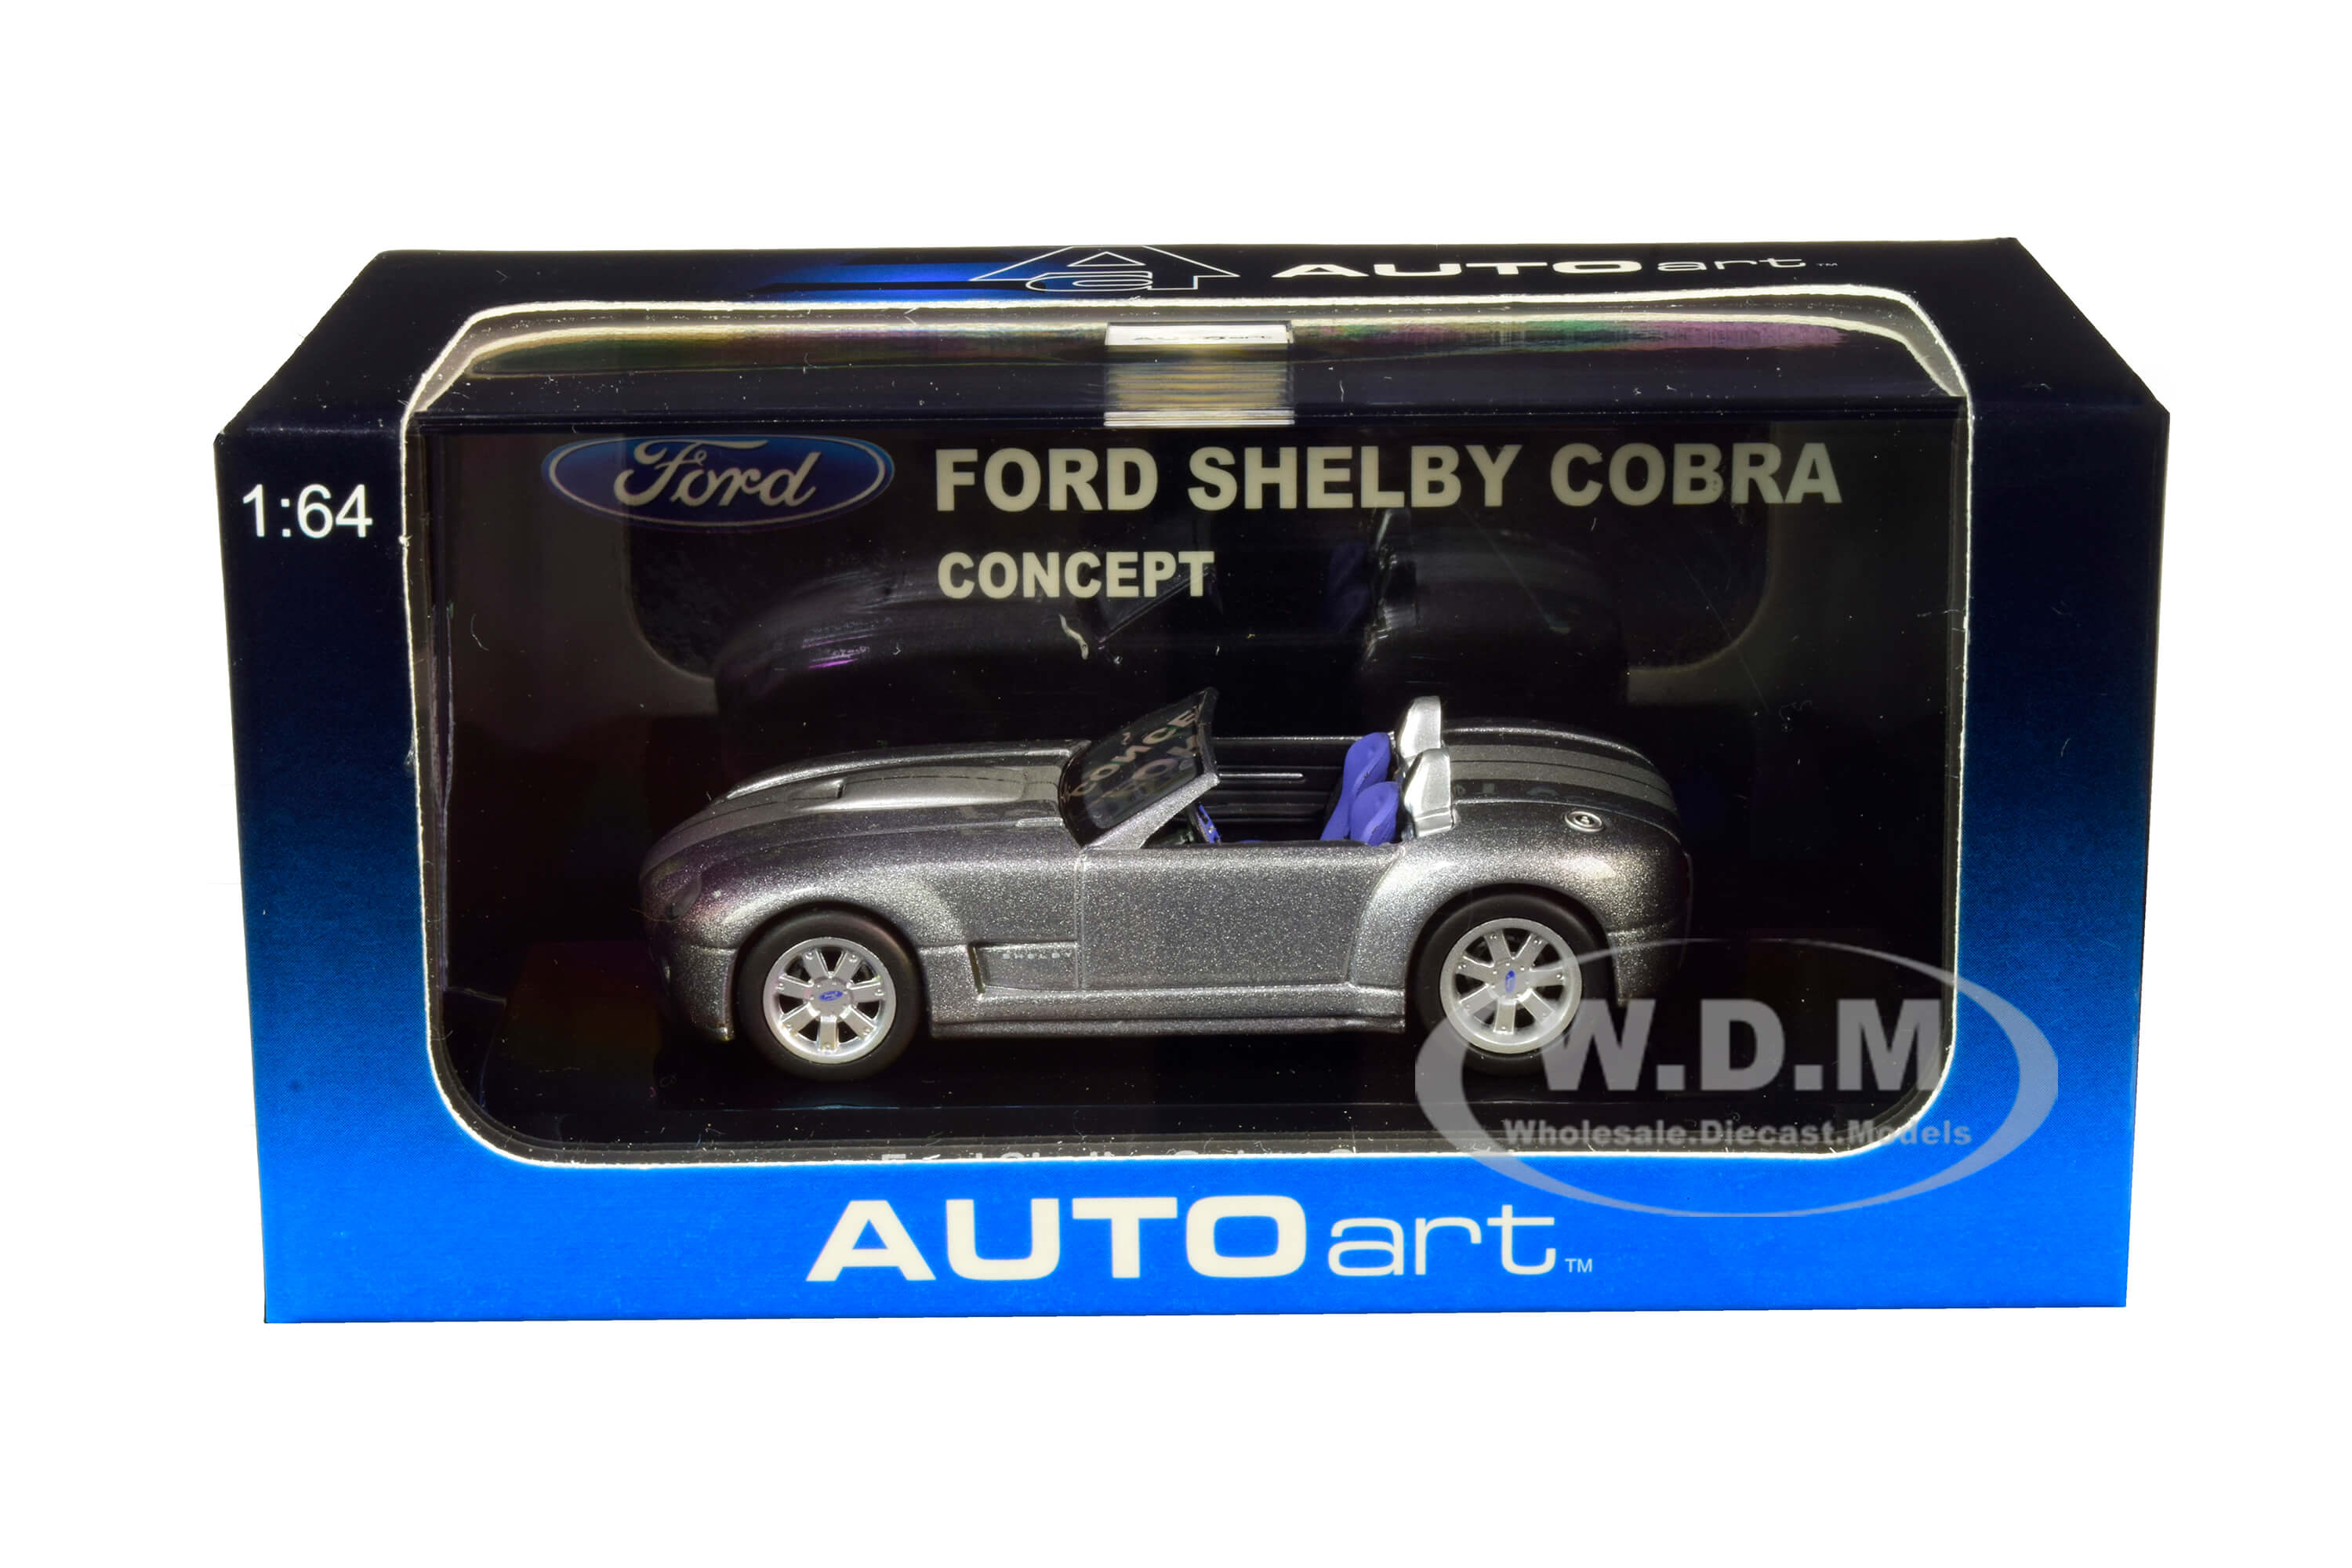 Ford Shelby Cobra Concept Tungsten Silver Metallic with Gray Stripes 1/64 Diecast Model Car by Autoart